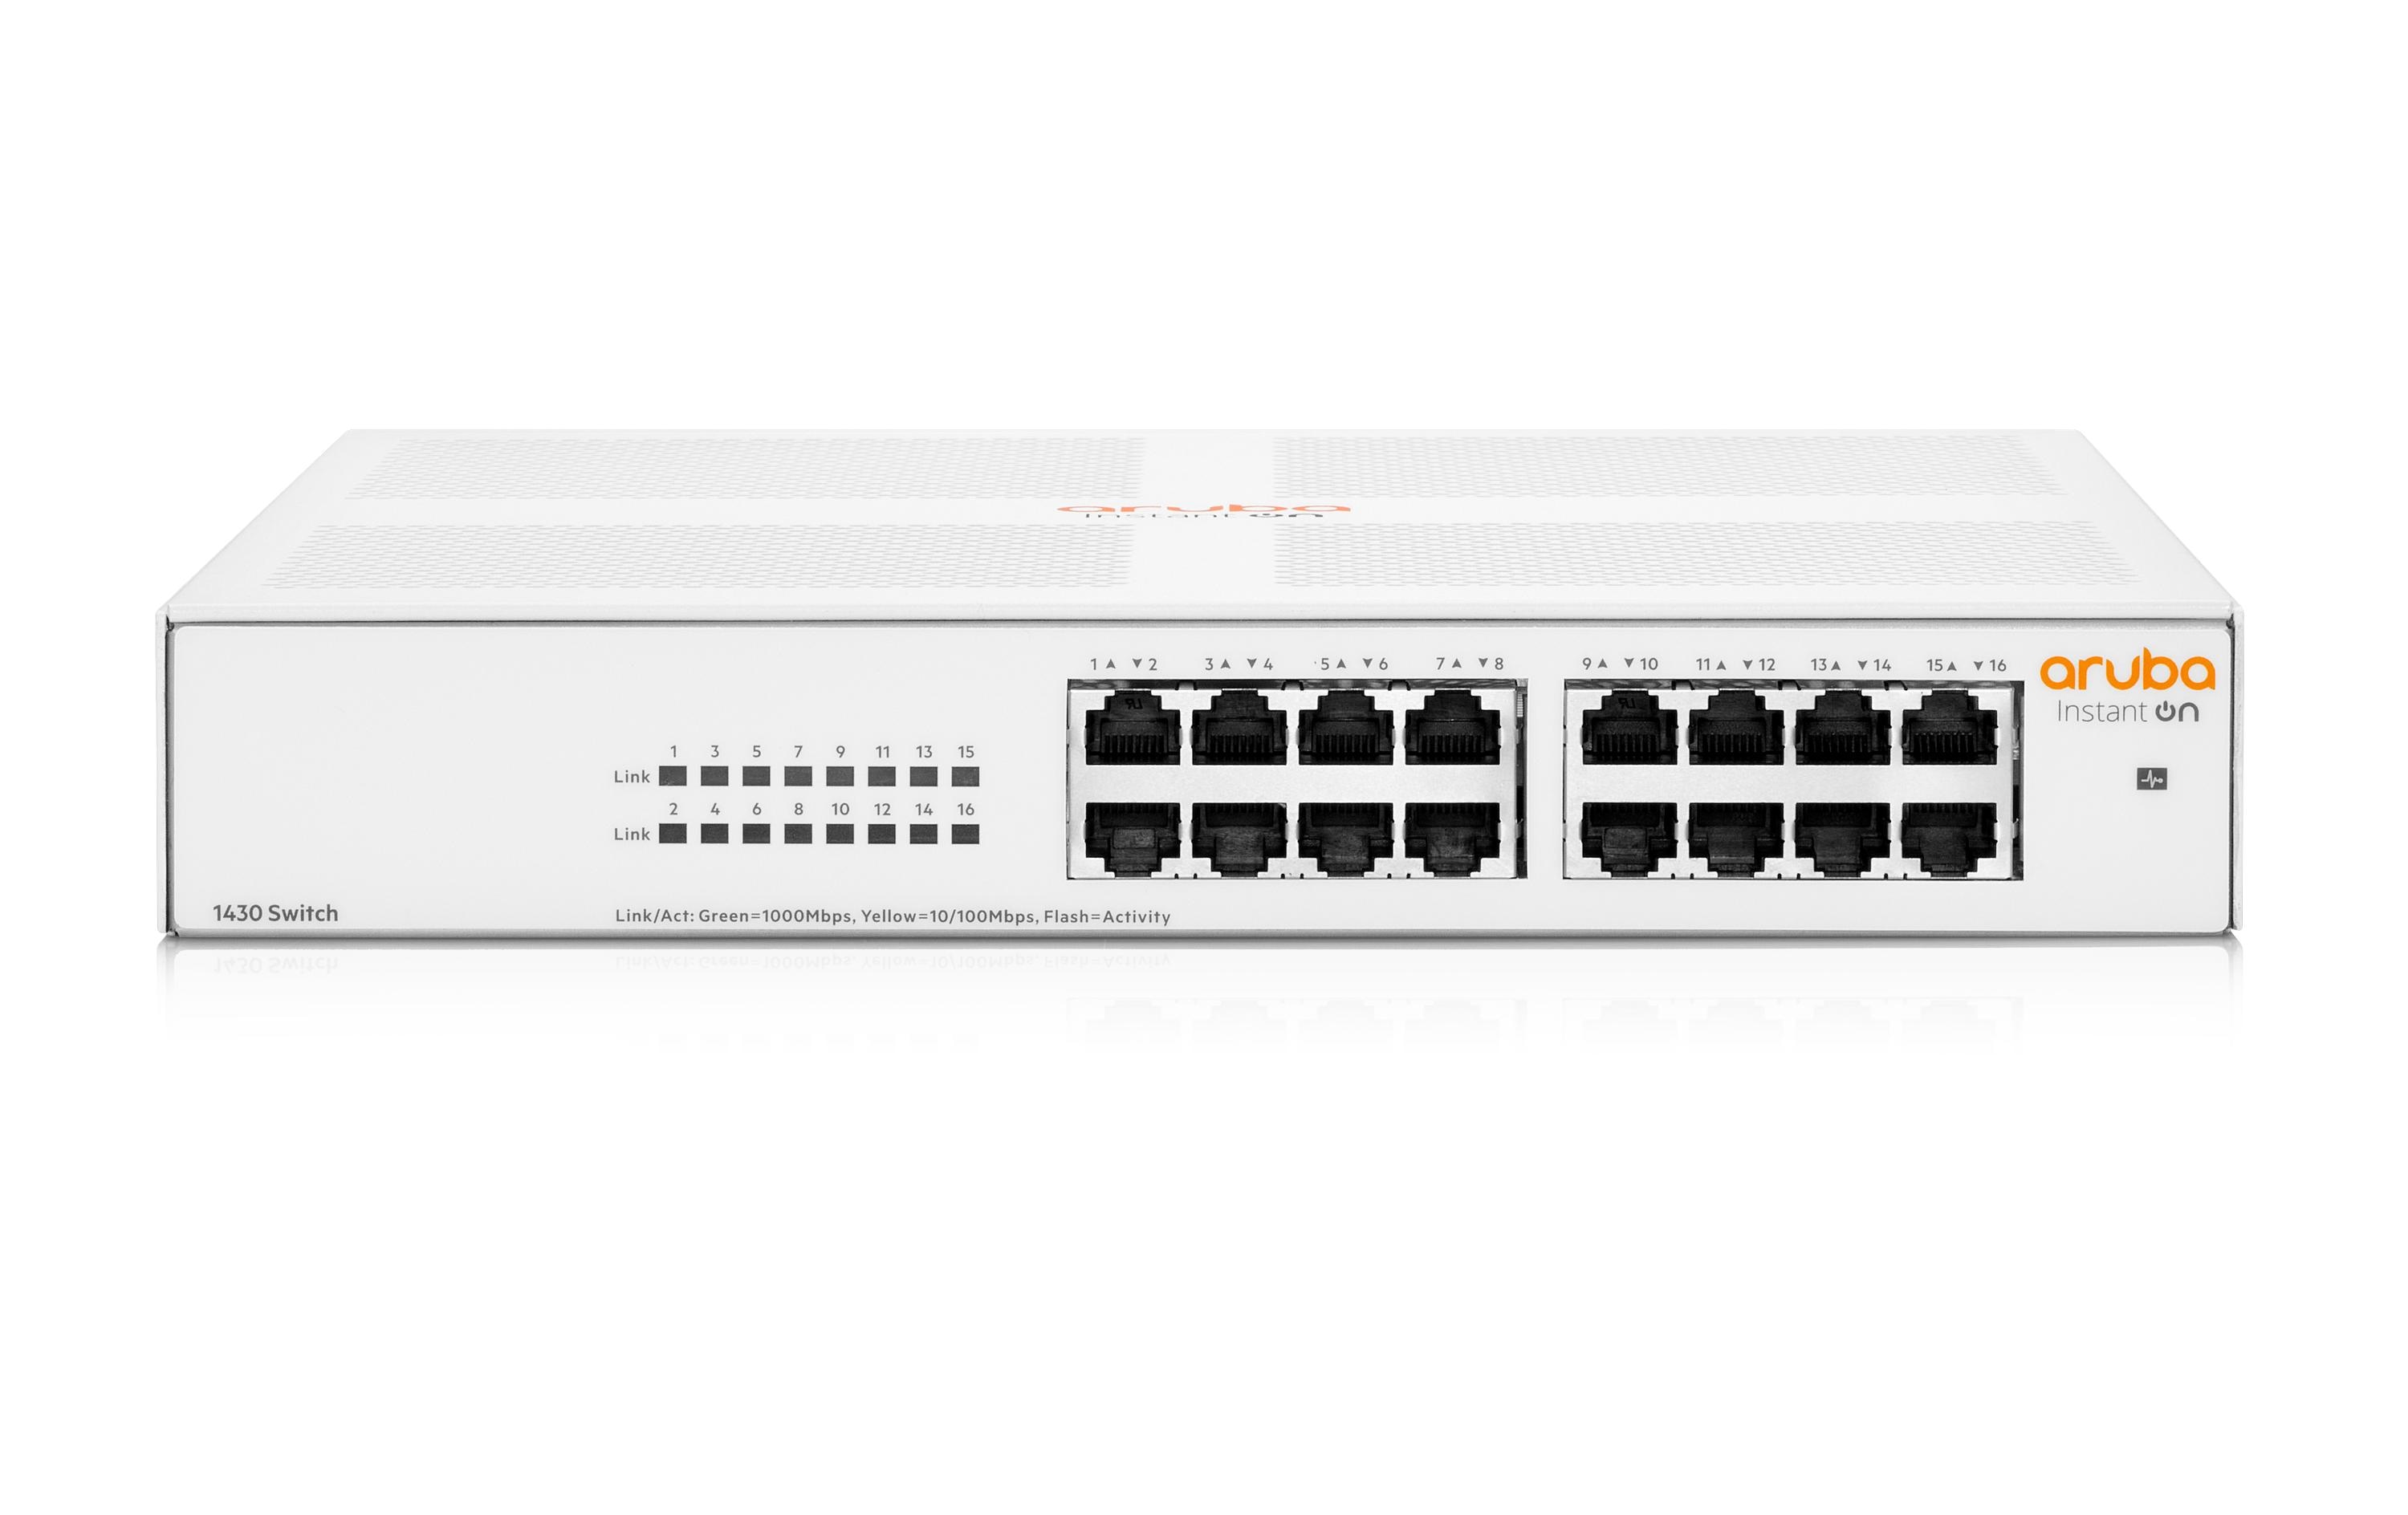 HPE Aruba Networking Switch Instant On 1430-16G 16 Port